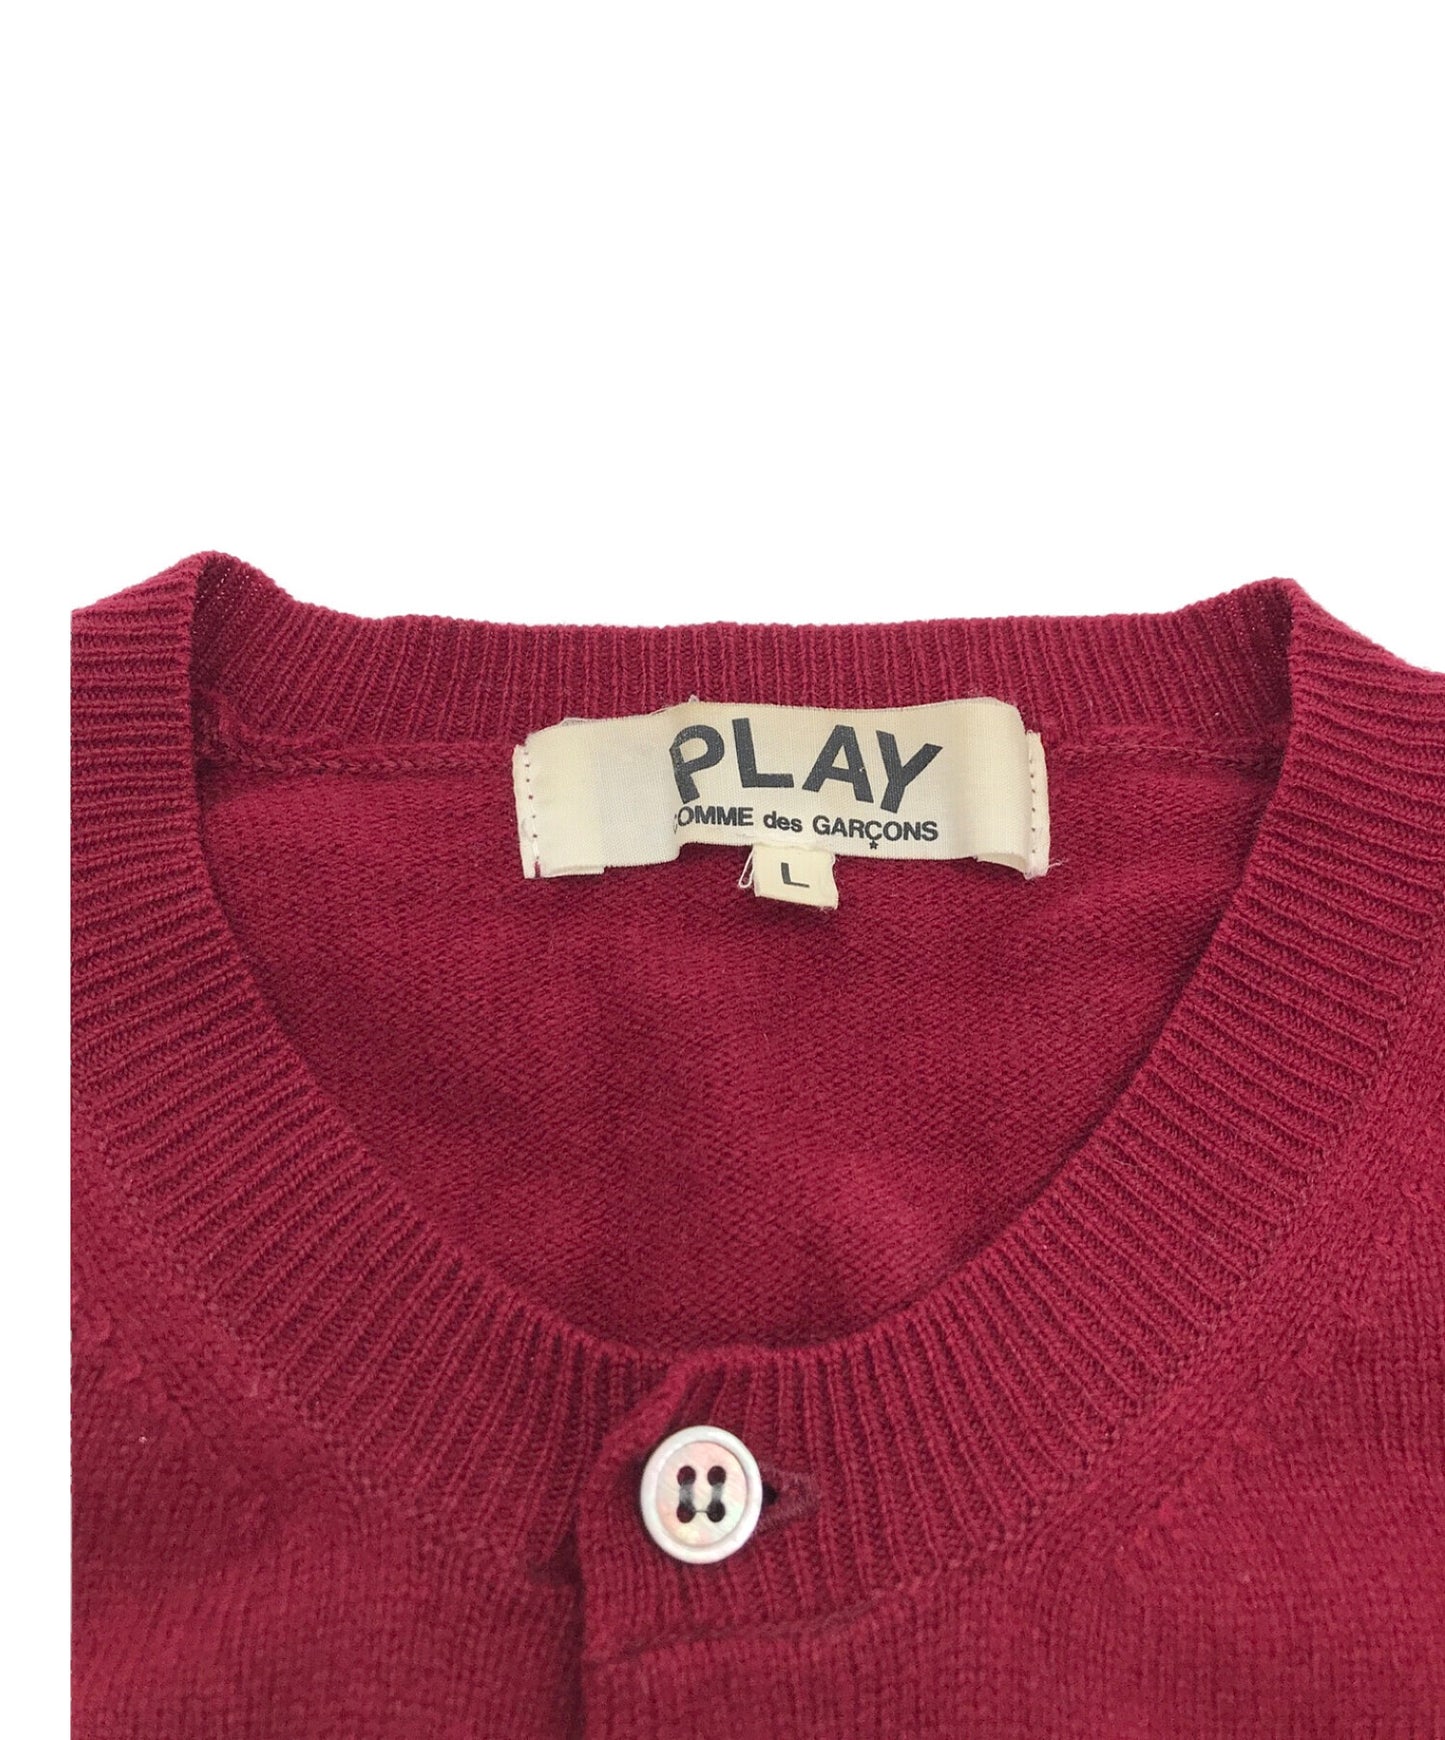 PLAY COMME des GARCONS Red Heart Wool Cardigan AZ-N007